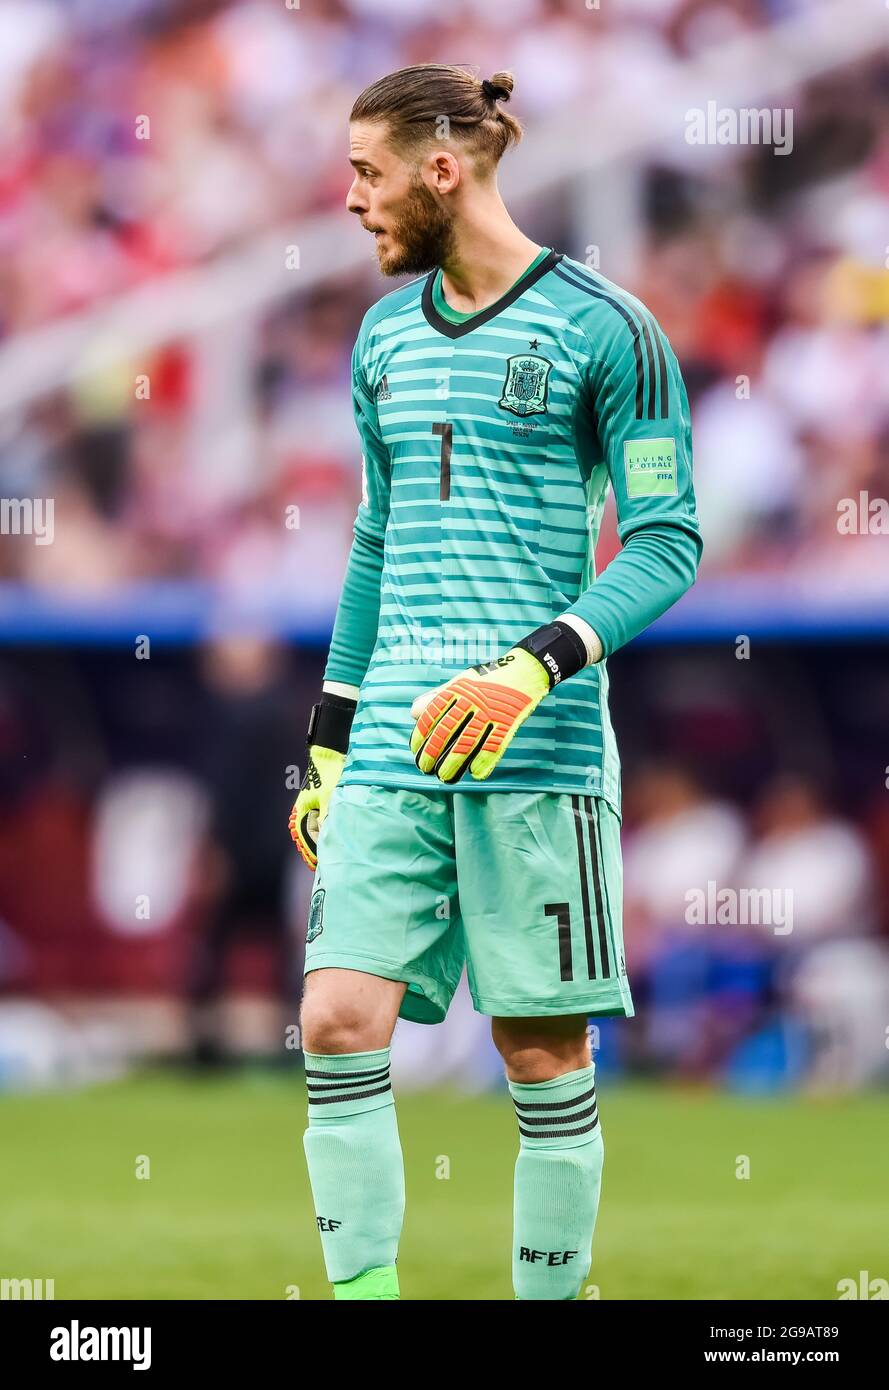 Moscow, Russia - July 1, 2018. Spain national football team goalkeeper David De Gea during FIFA World Cup 2018 Round of 16 match Spain vs Russia Stock Photo